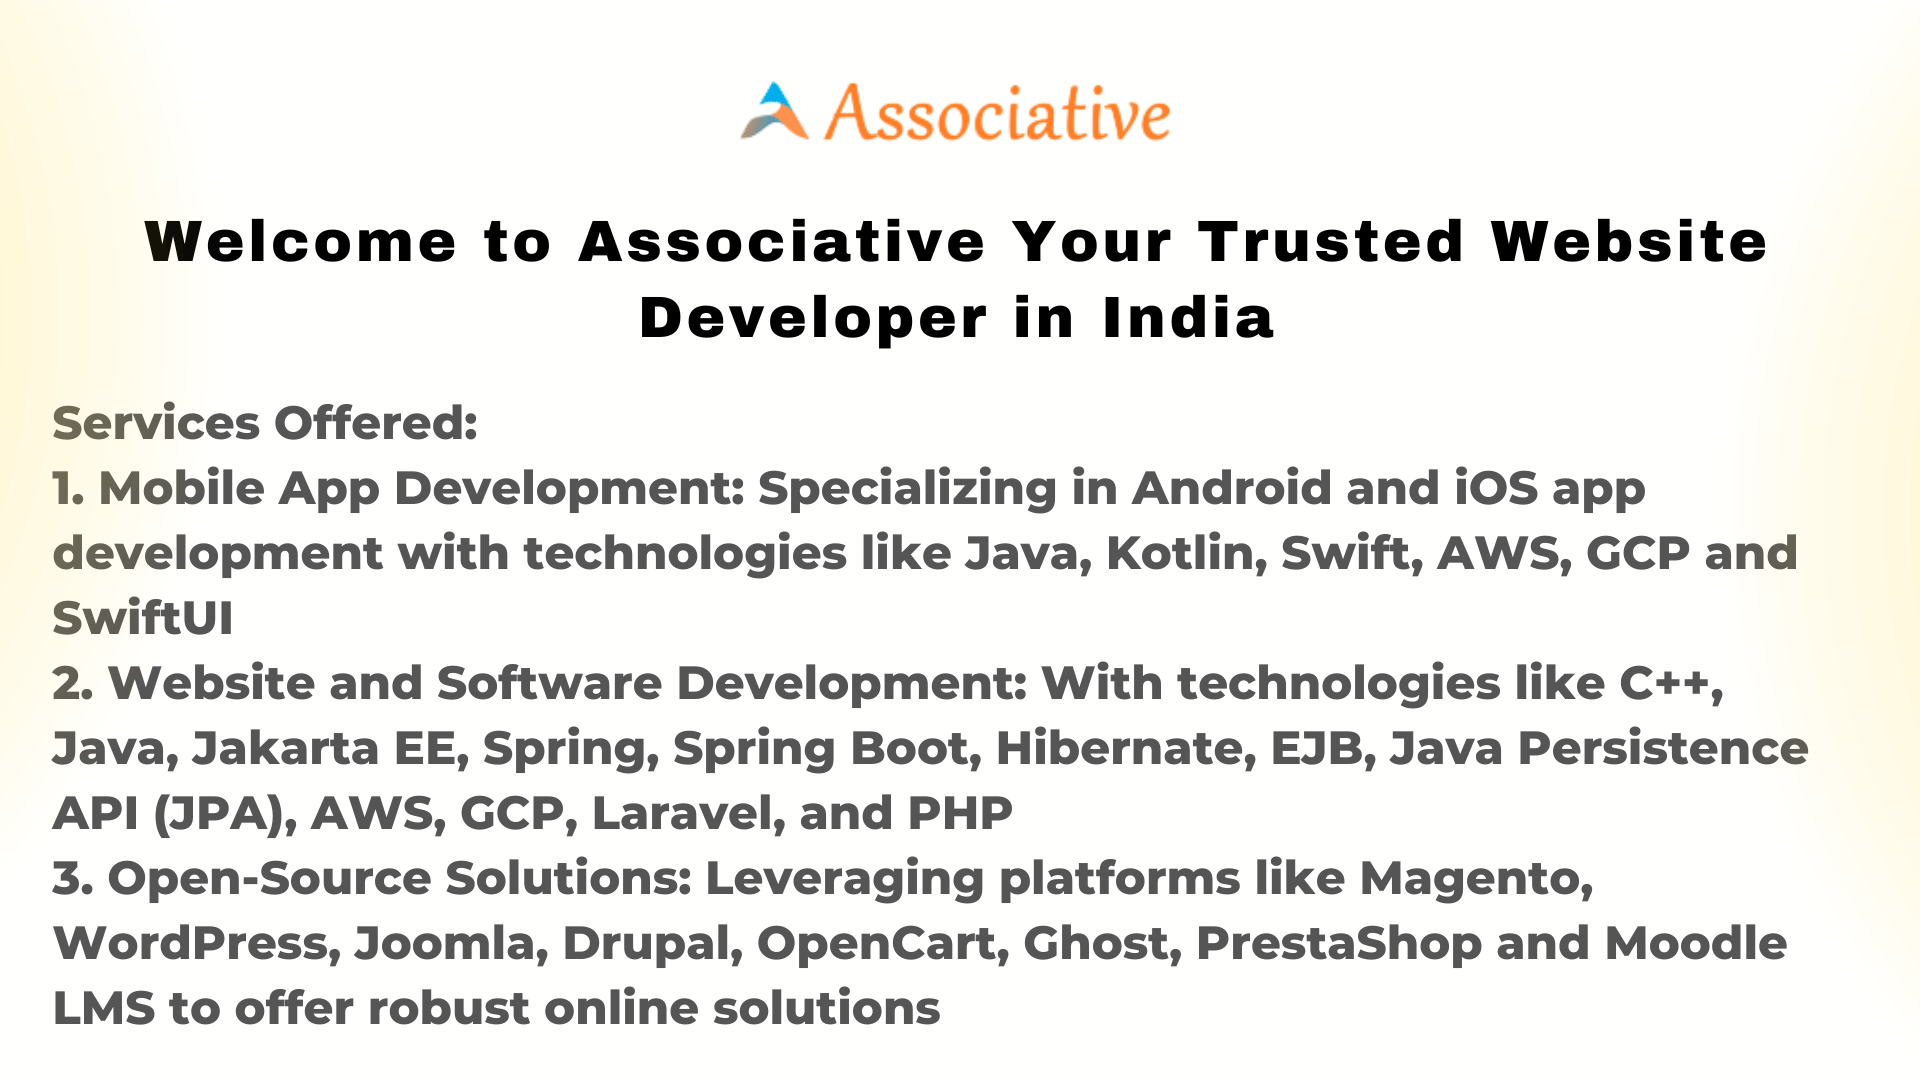 Welcome to Associative Your Trusted Website Developer in India